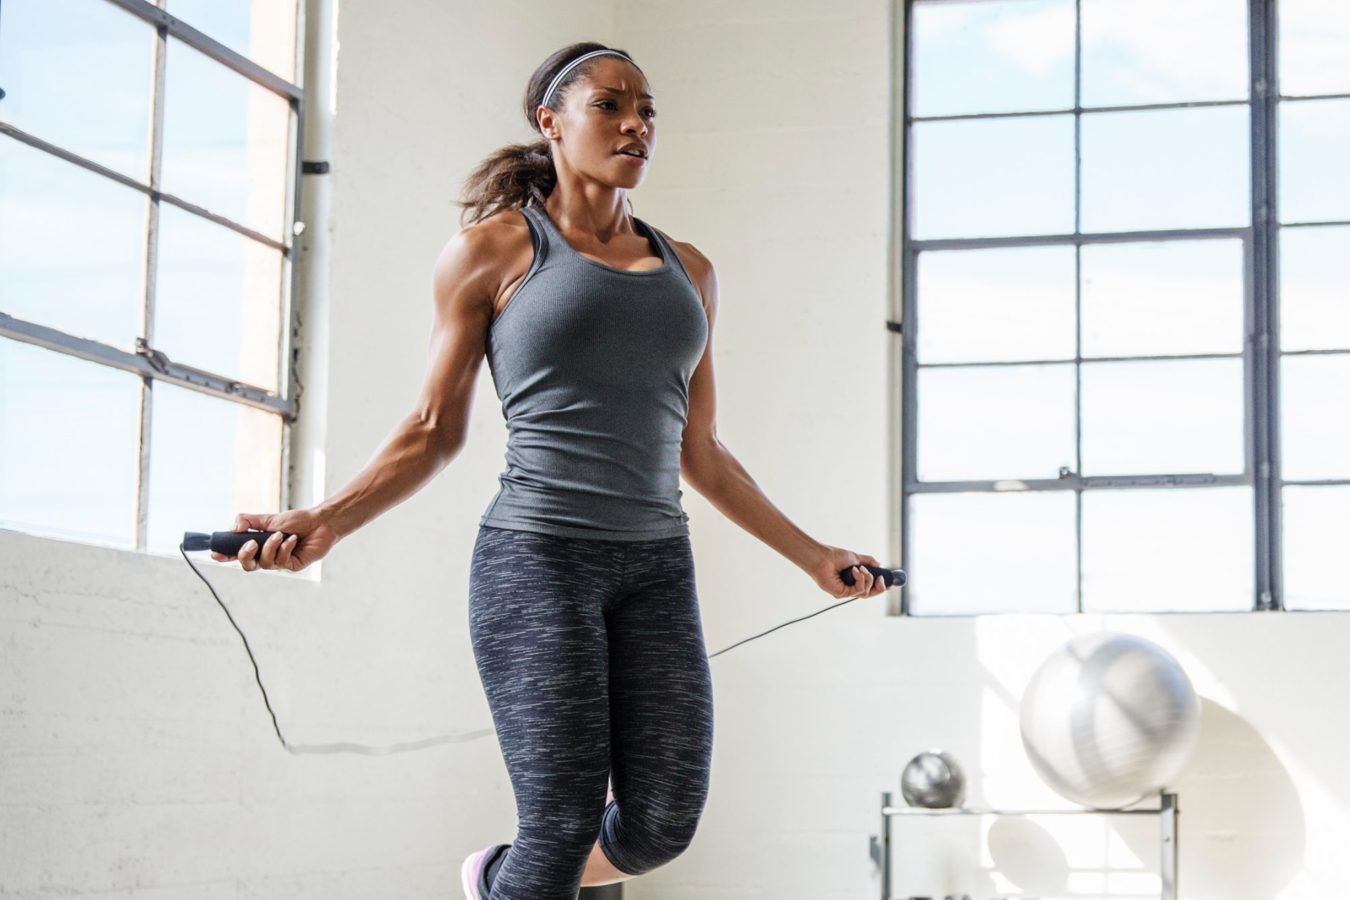 Cardio exercises to incorporate into your home workout — besides running